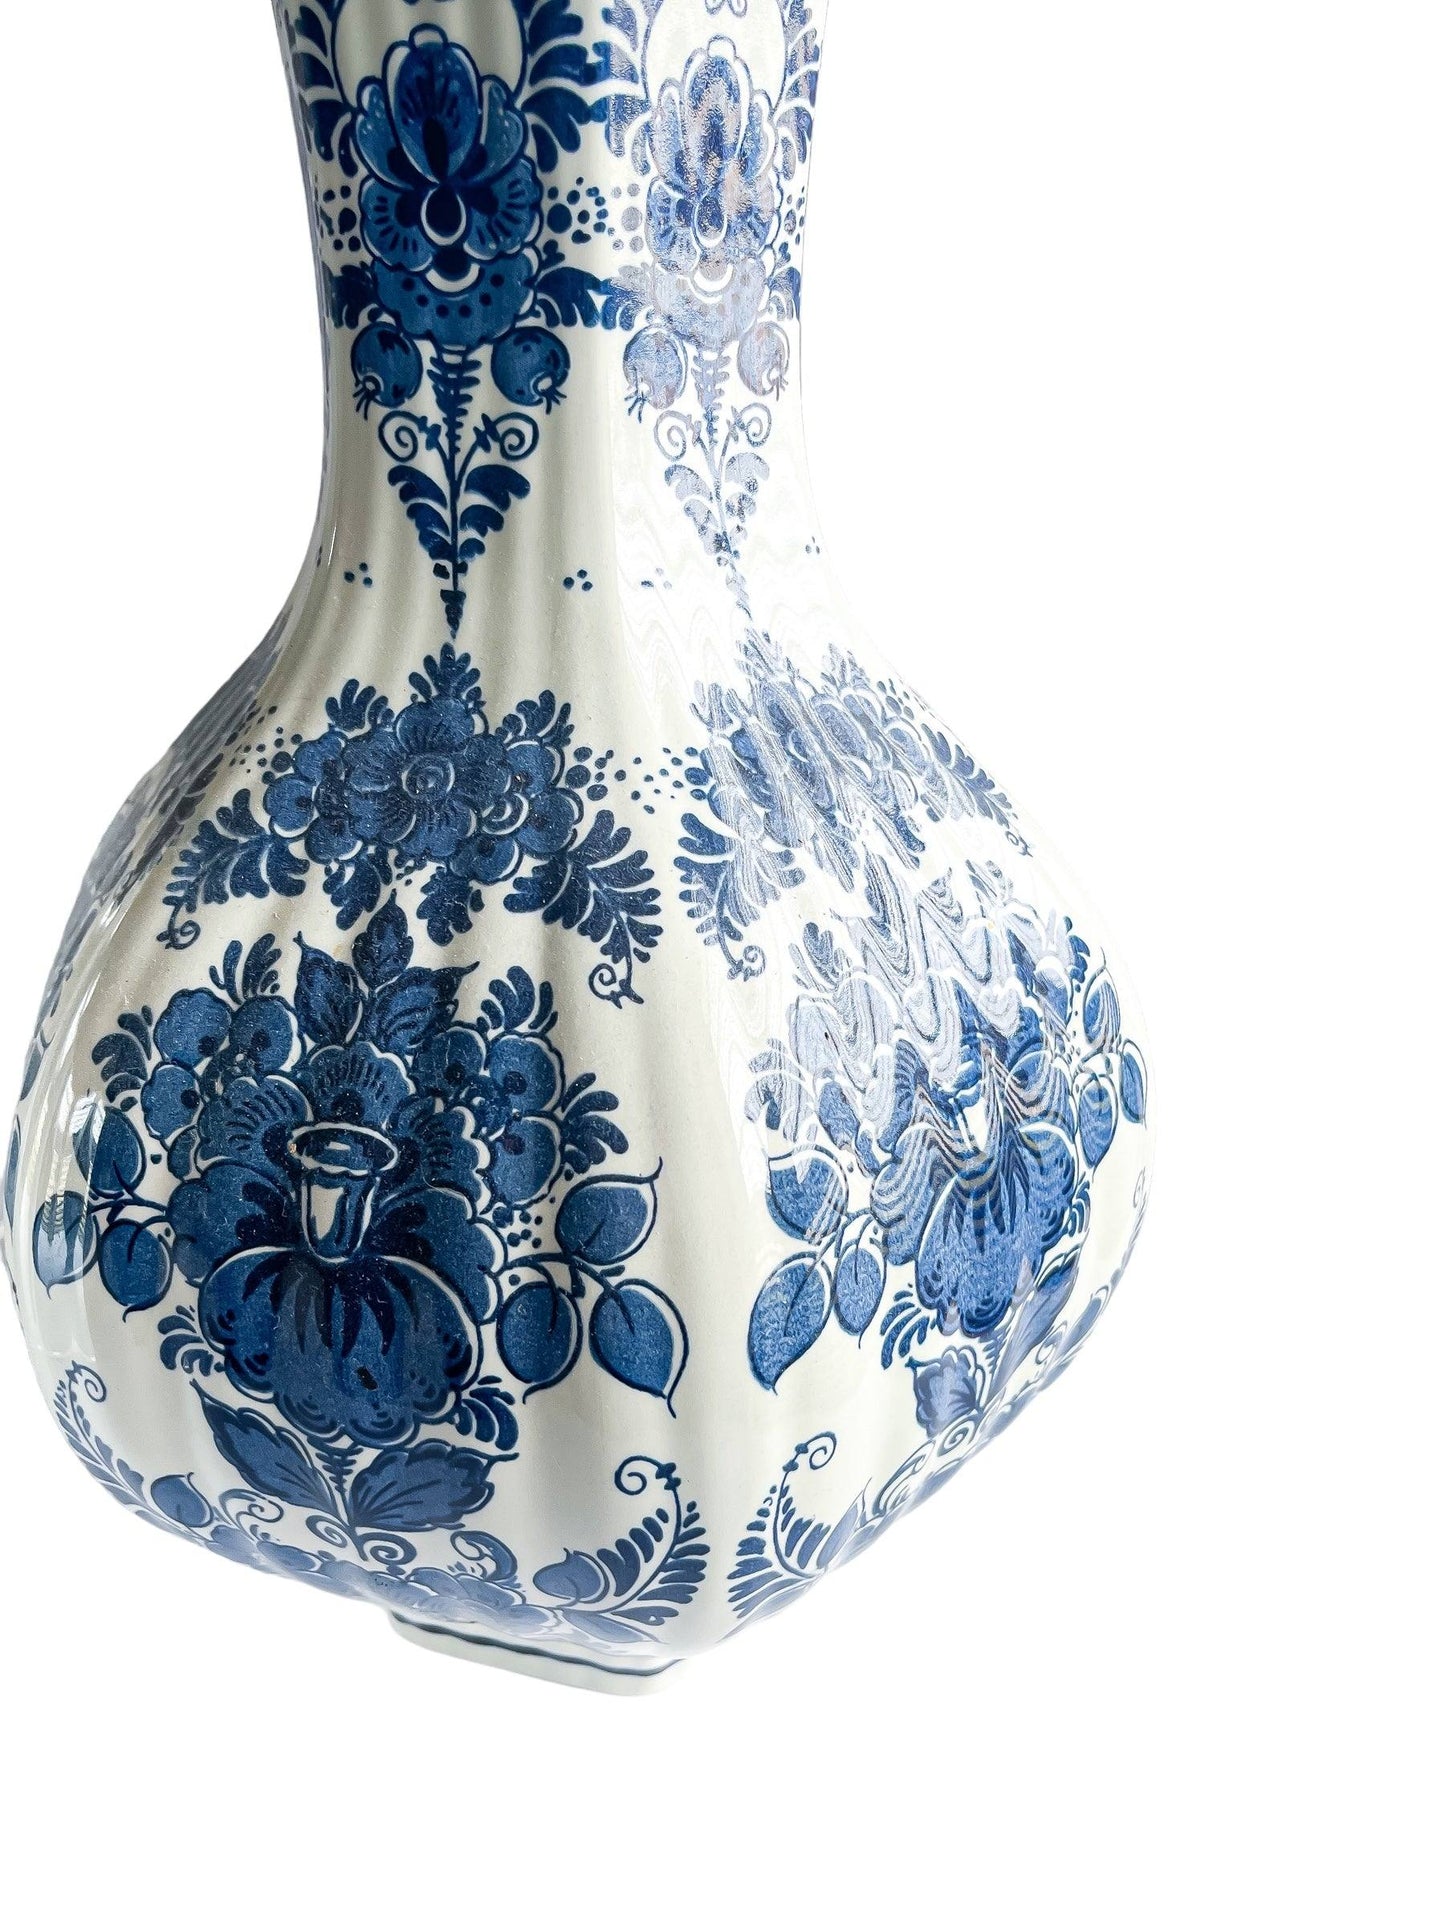 Large Delft Vase with Blue Floral Patterns - Handpainted, Made in Holland - SOSC Home